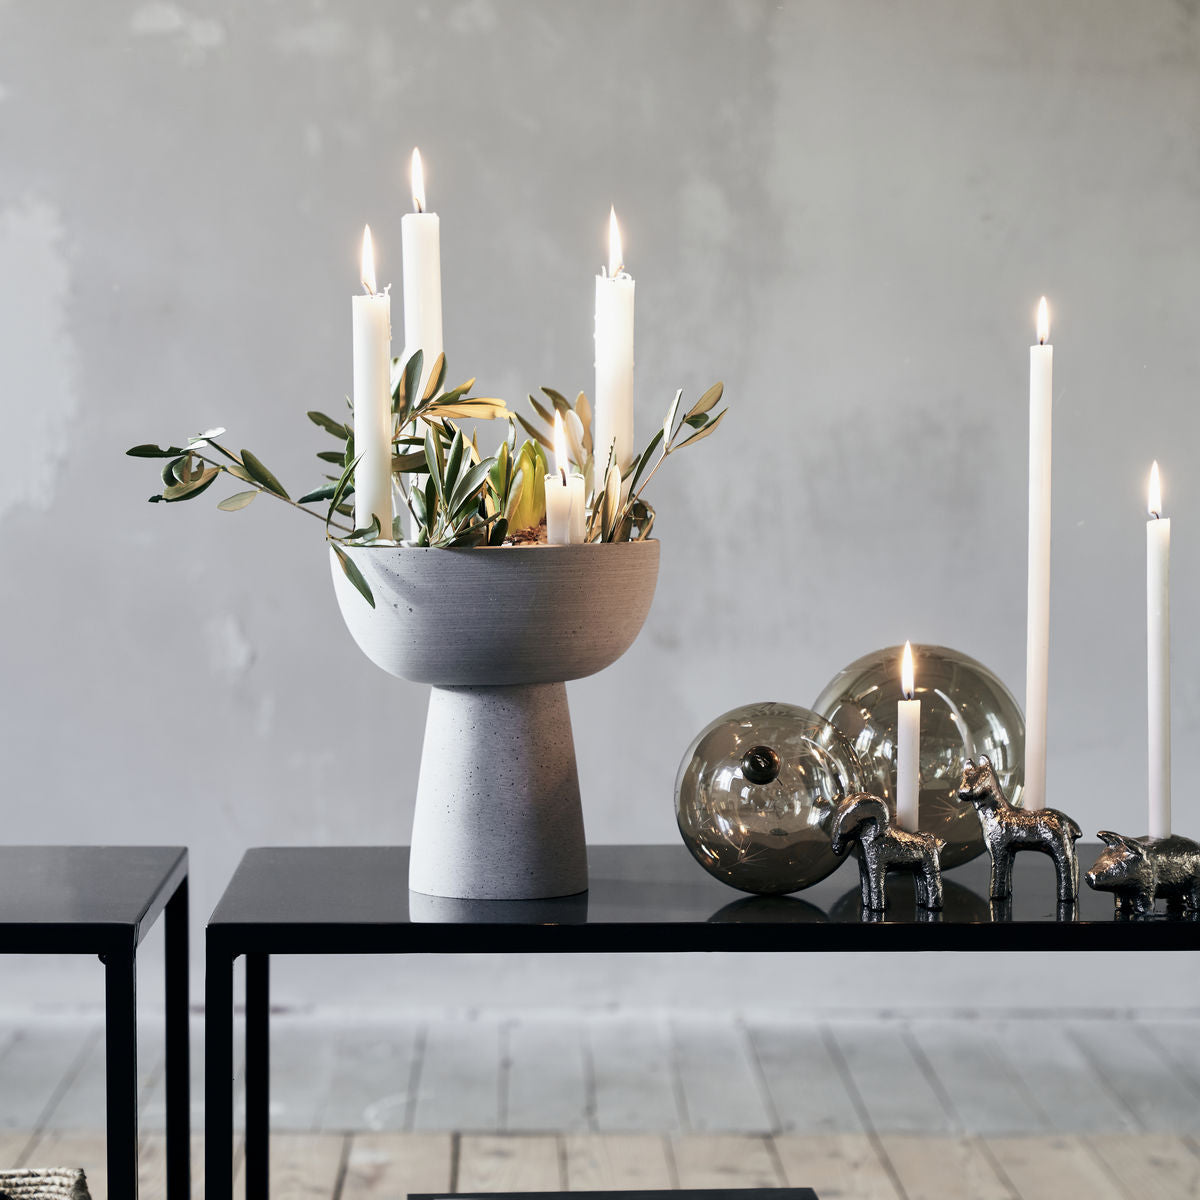 Grey Marb Candle Holder Round